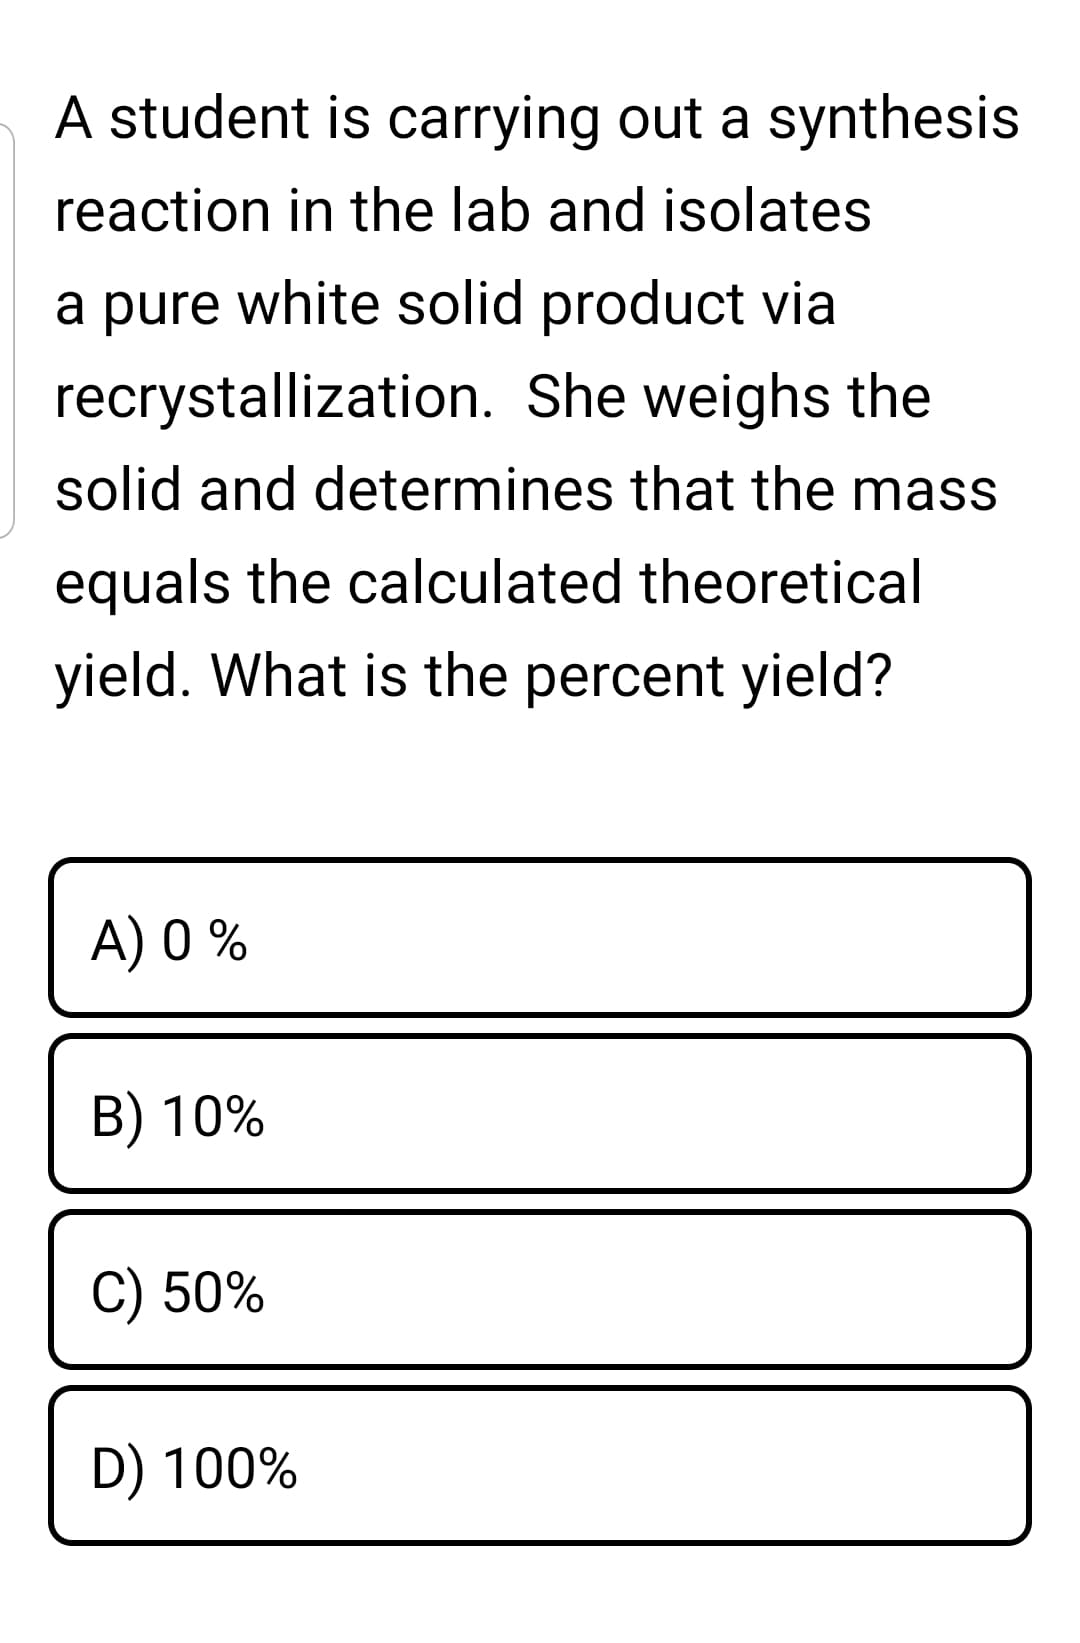 A student is carrying out a synthesis
reaction in the lab and isolates
a pure white solid product via
recrystallization. She weighs the
solid and determines that the mass
equals the calculated theoretical
yield. What is the percent yield?
A) 0 %
B) 10%
C) 50%
D) 100%
